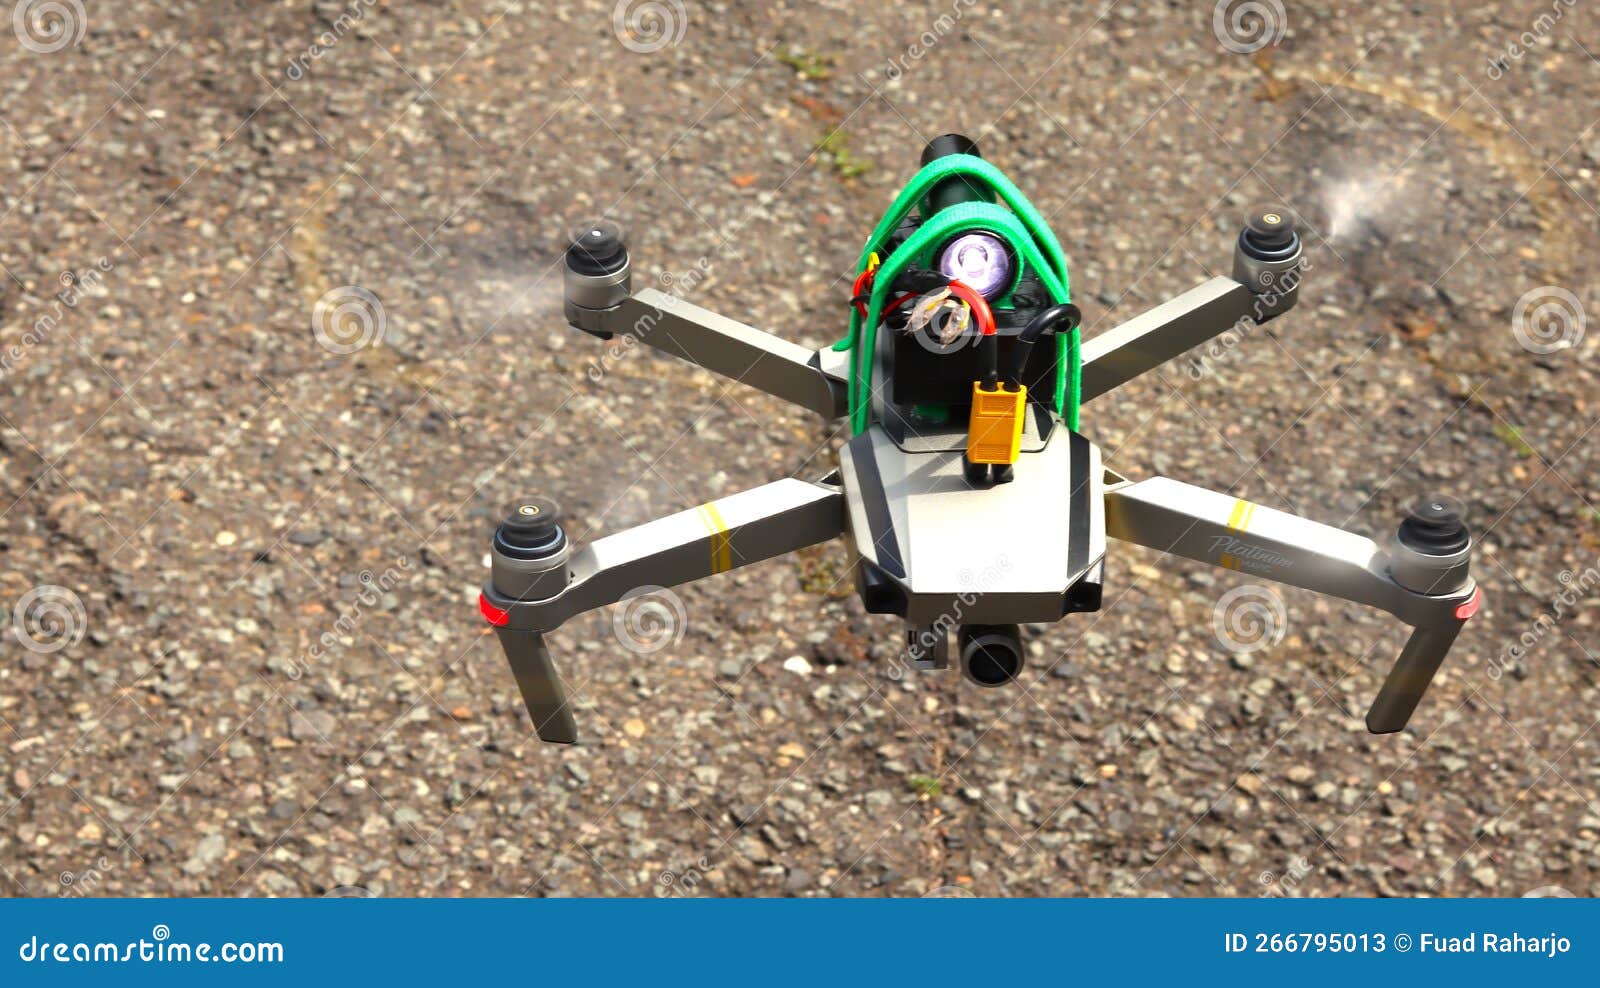 quadcoper with extra battery is flying